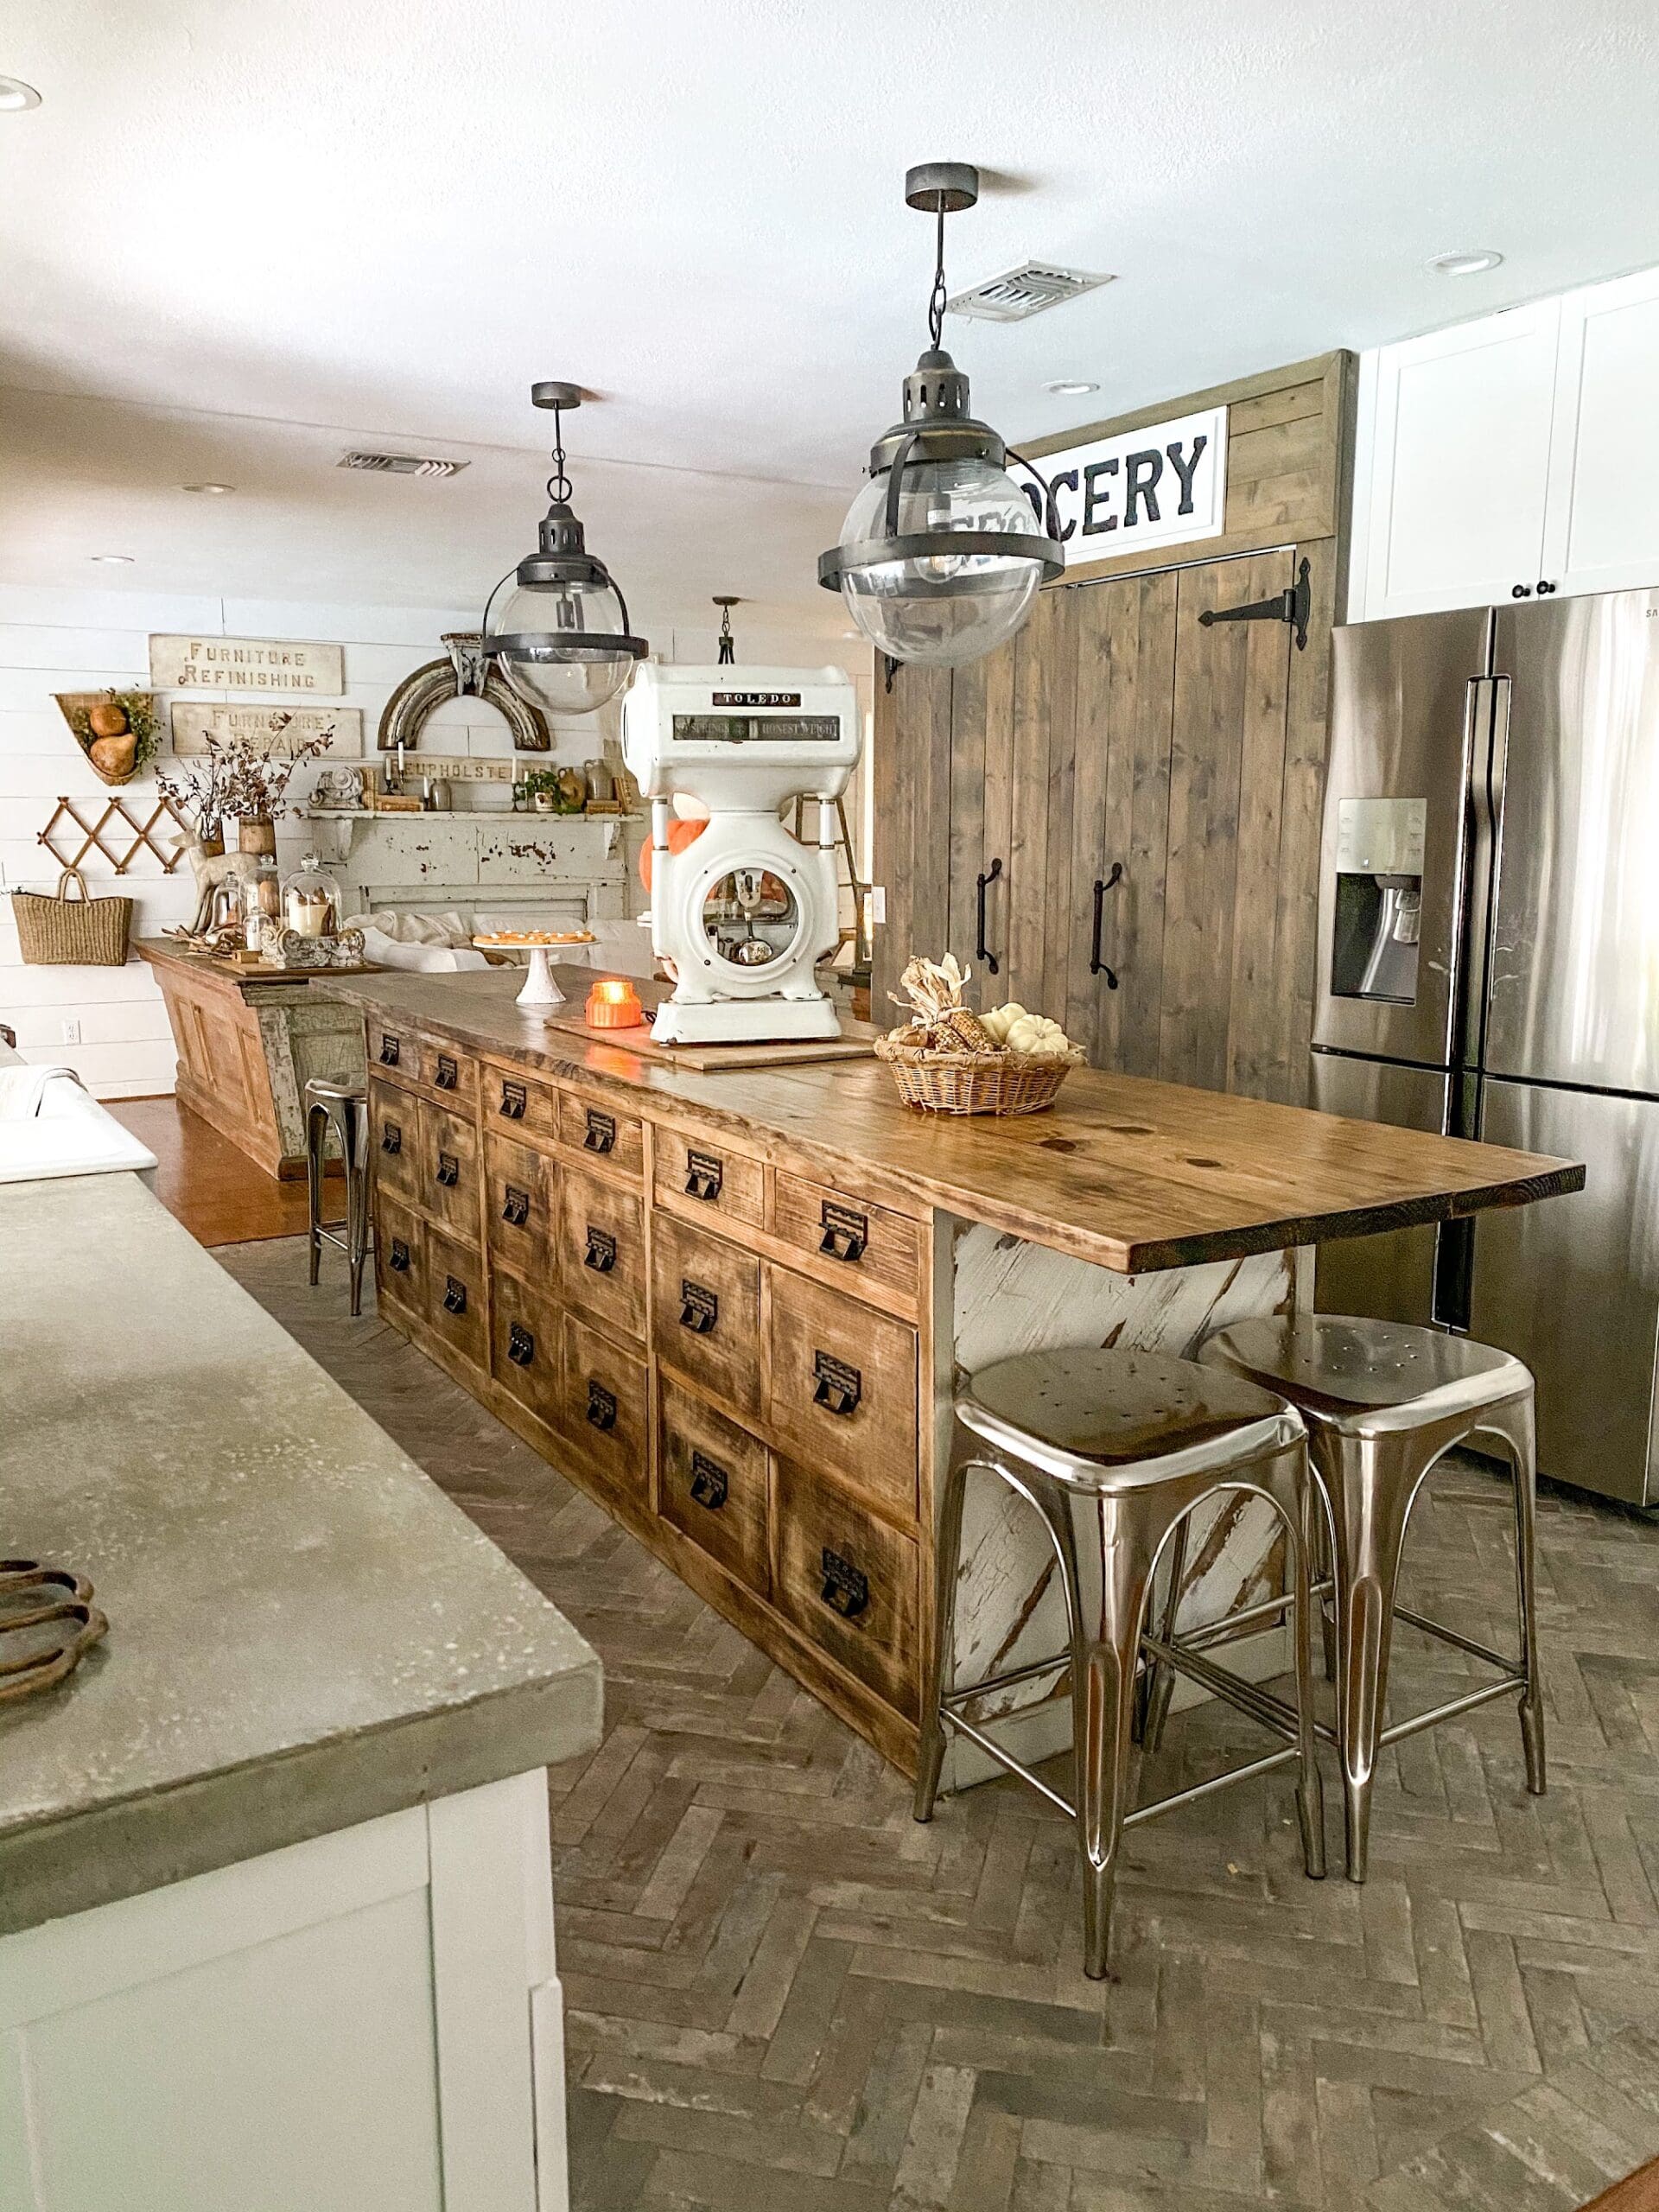 Using Antique and Vintage Kitchen Items